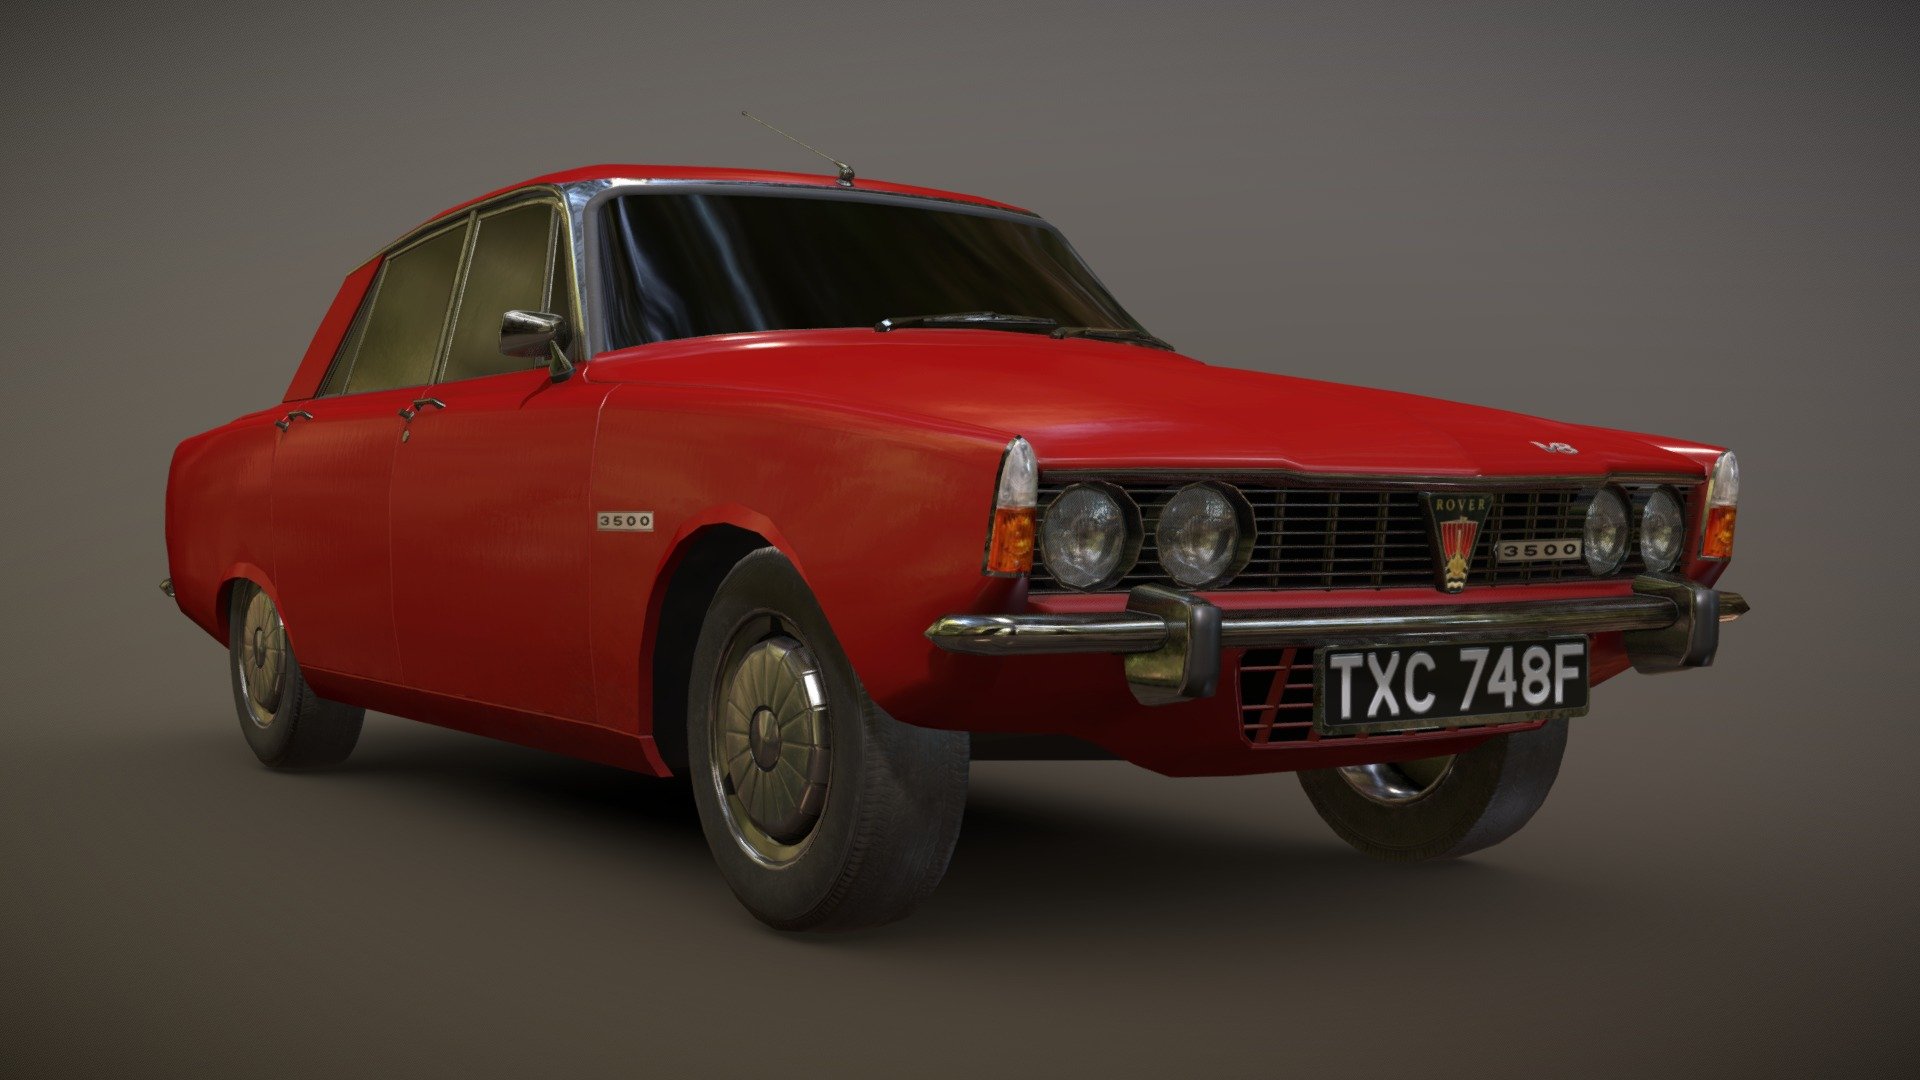 The Rover Three Thousand Five. Full rough-metal textures, done this to improve my texturing skills. Enjoy! - 1968 Rover P6 3500 Series 1 - Download Free 3D model by Fishboe (@ministephen) 3d model